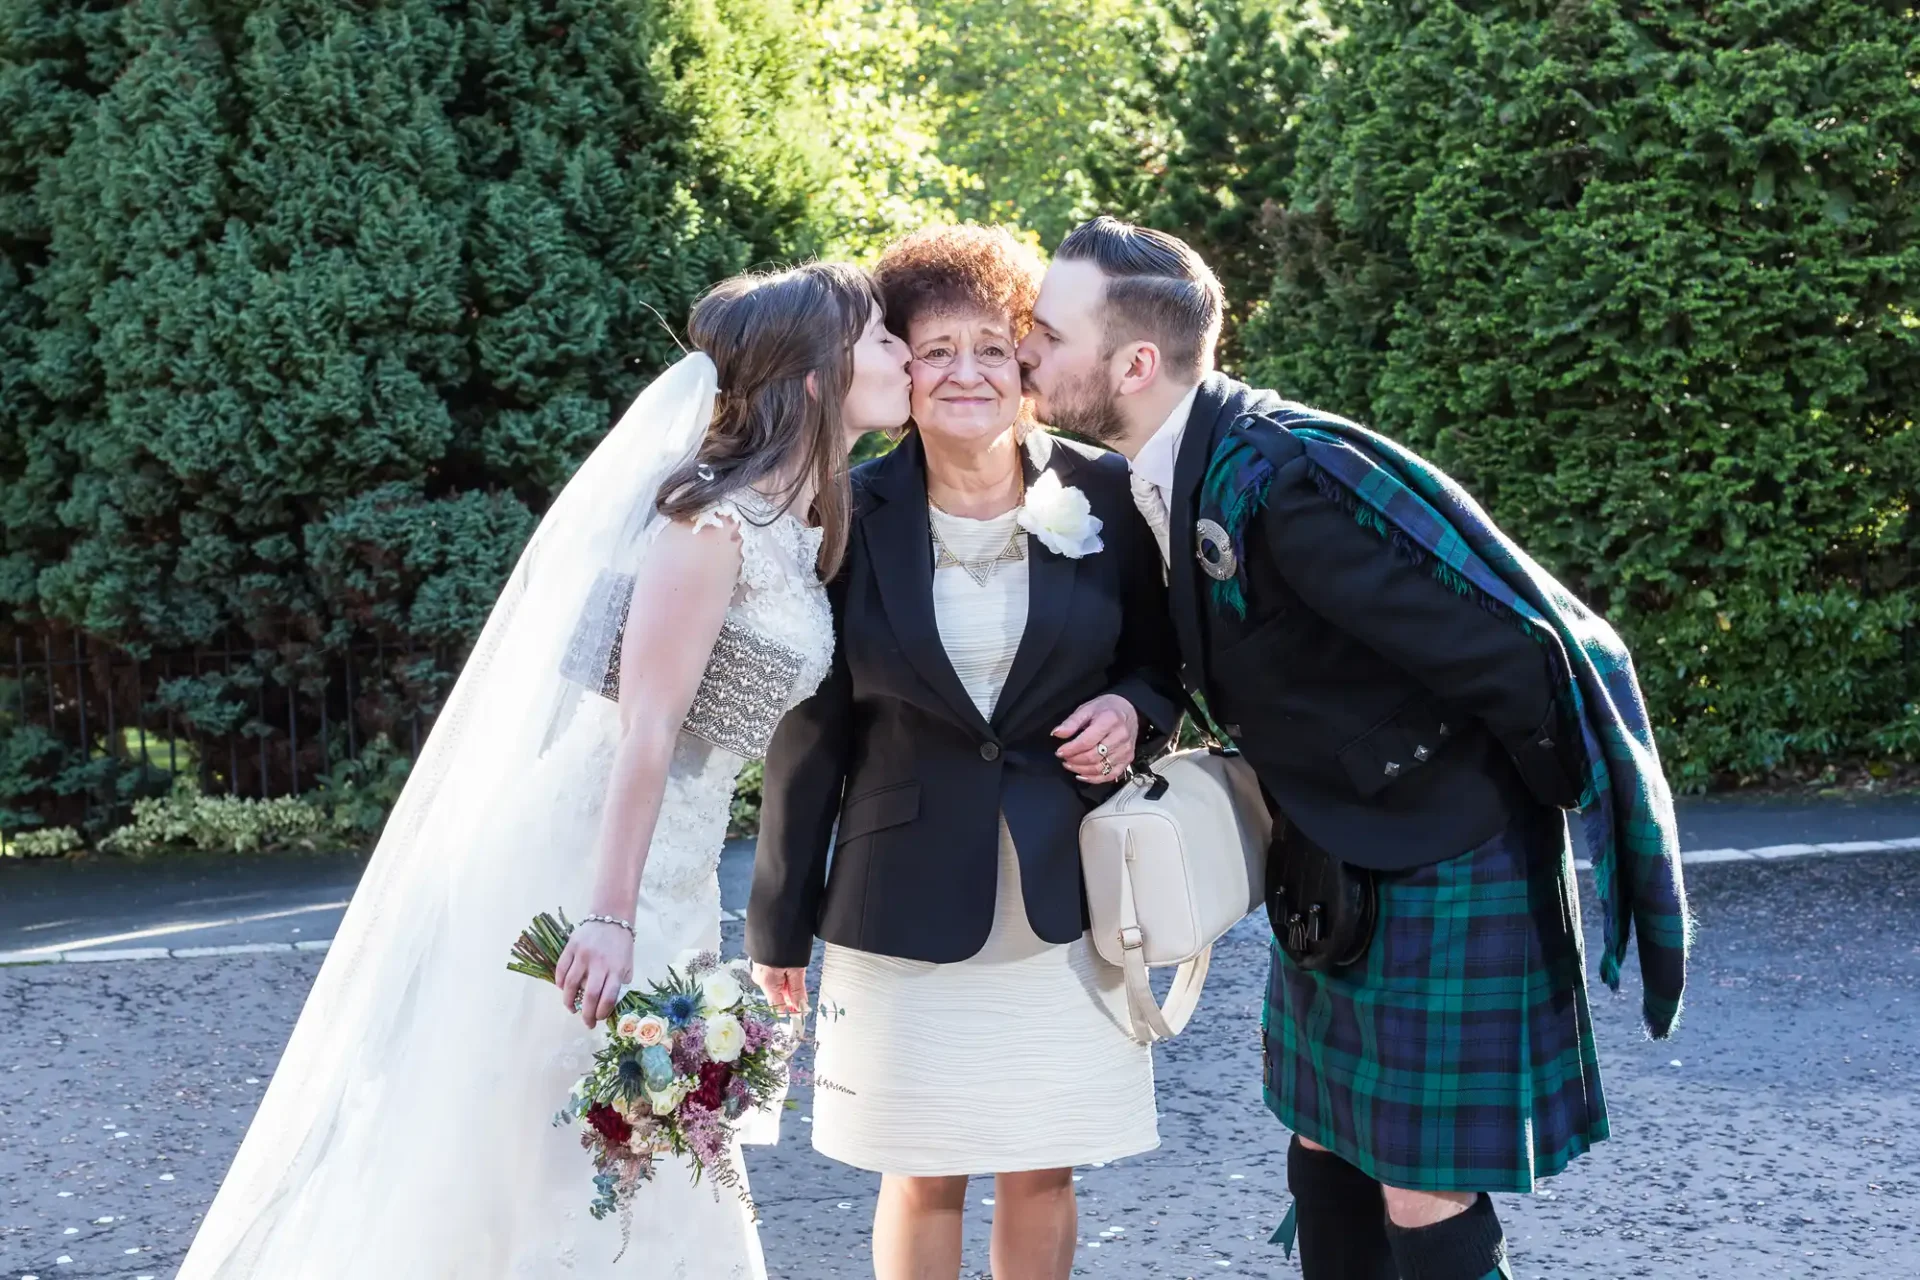 A bride and groom in wedding attire affectionately kiss an older woman on her cheeks outside, with trees in the background. the groom wears a kilt.